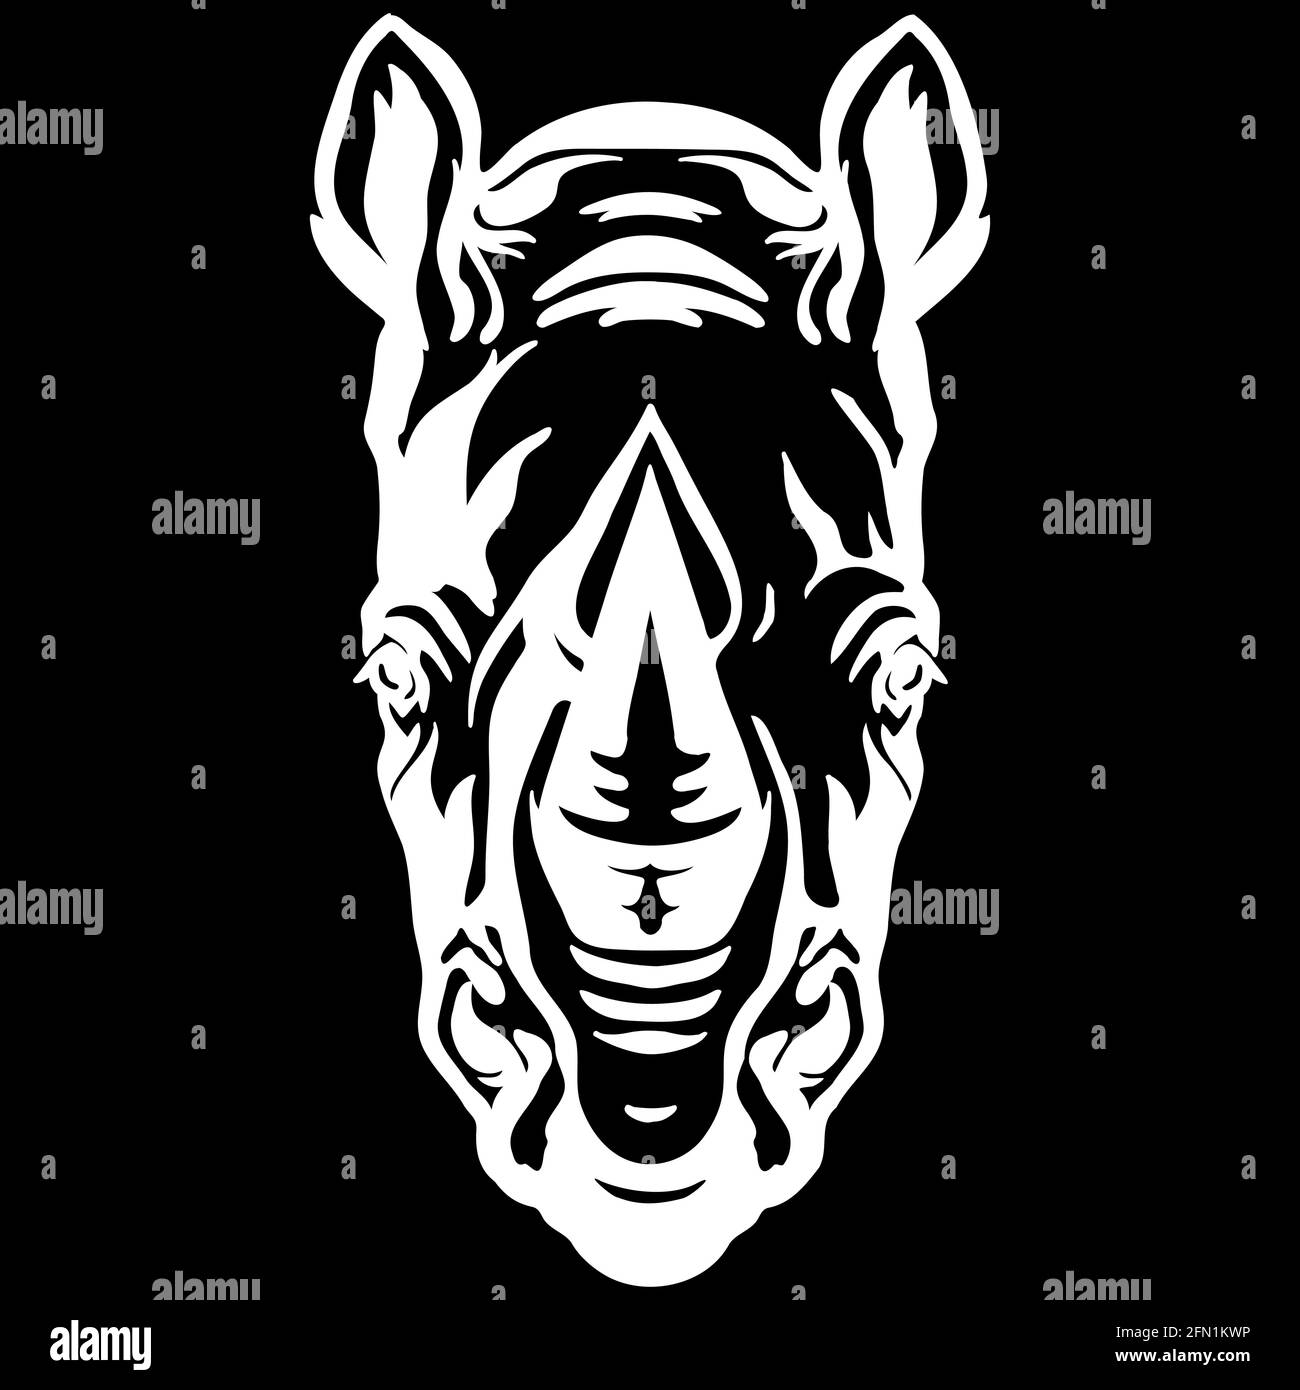 Mascot. Head of rhino. Vector illustration white color front view of wild animal isolated on black background. For decoration, print, design, logo, sp Stock Vector